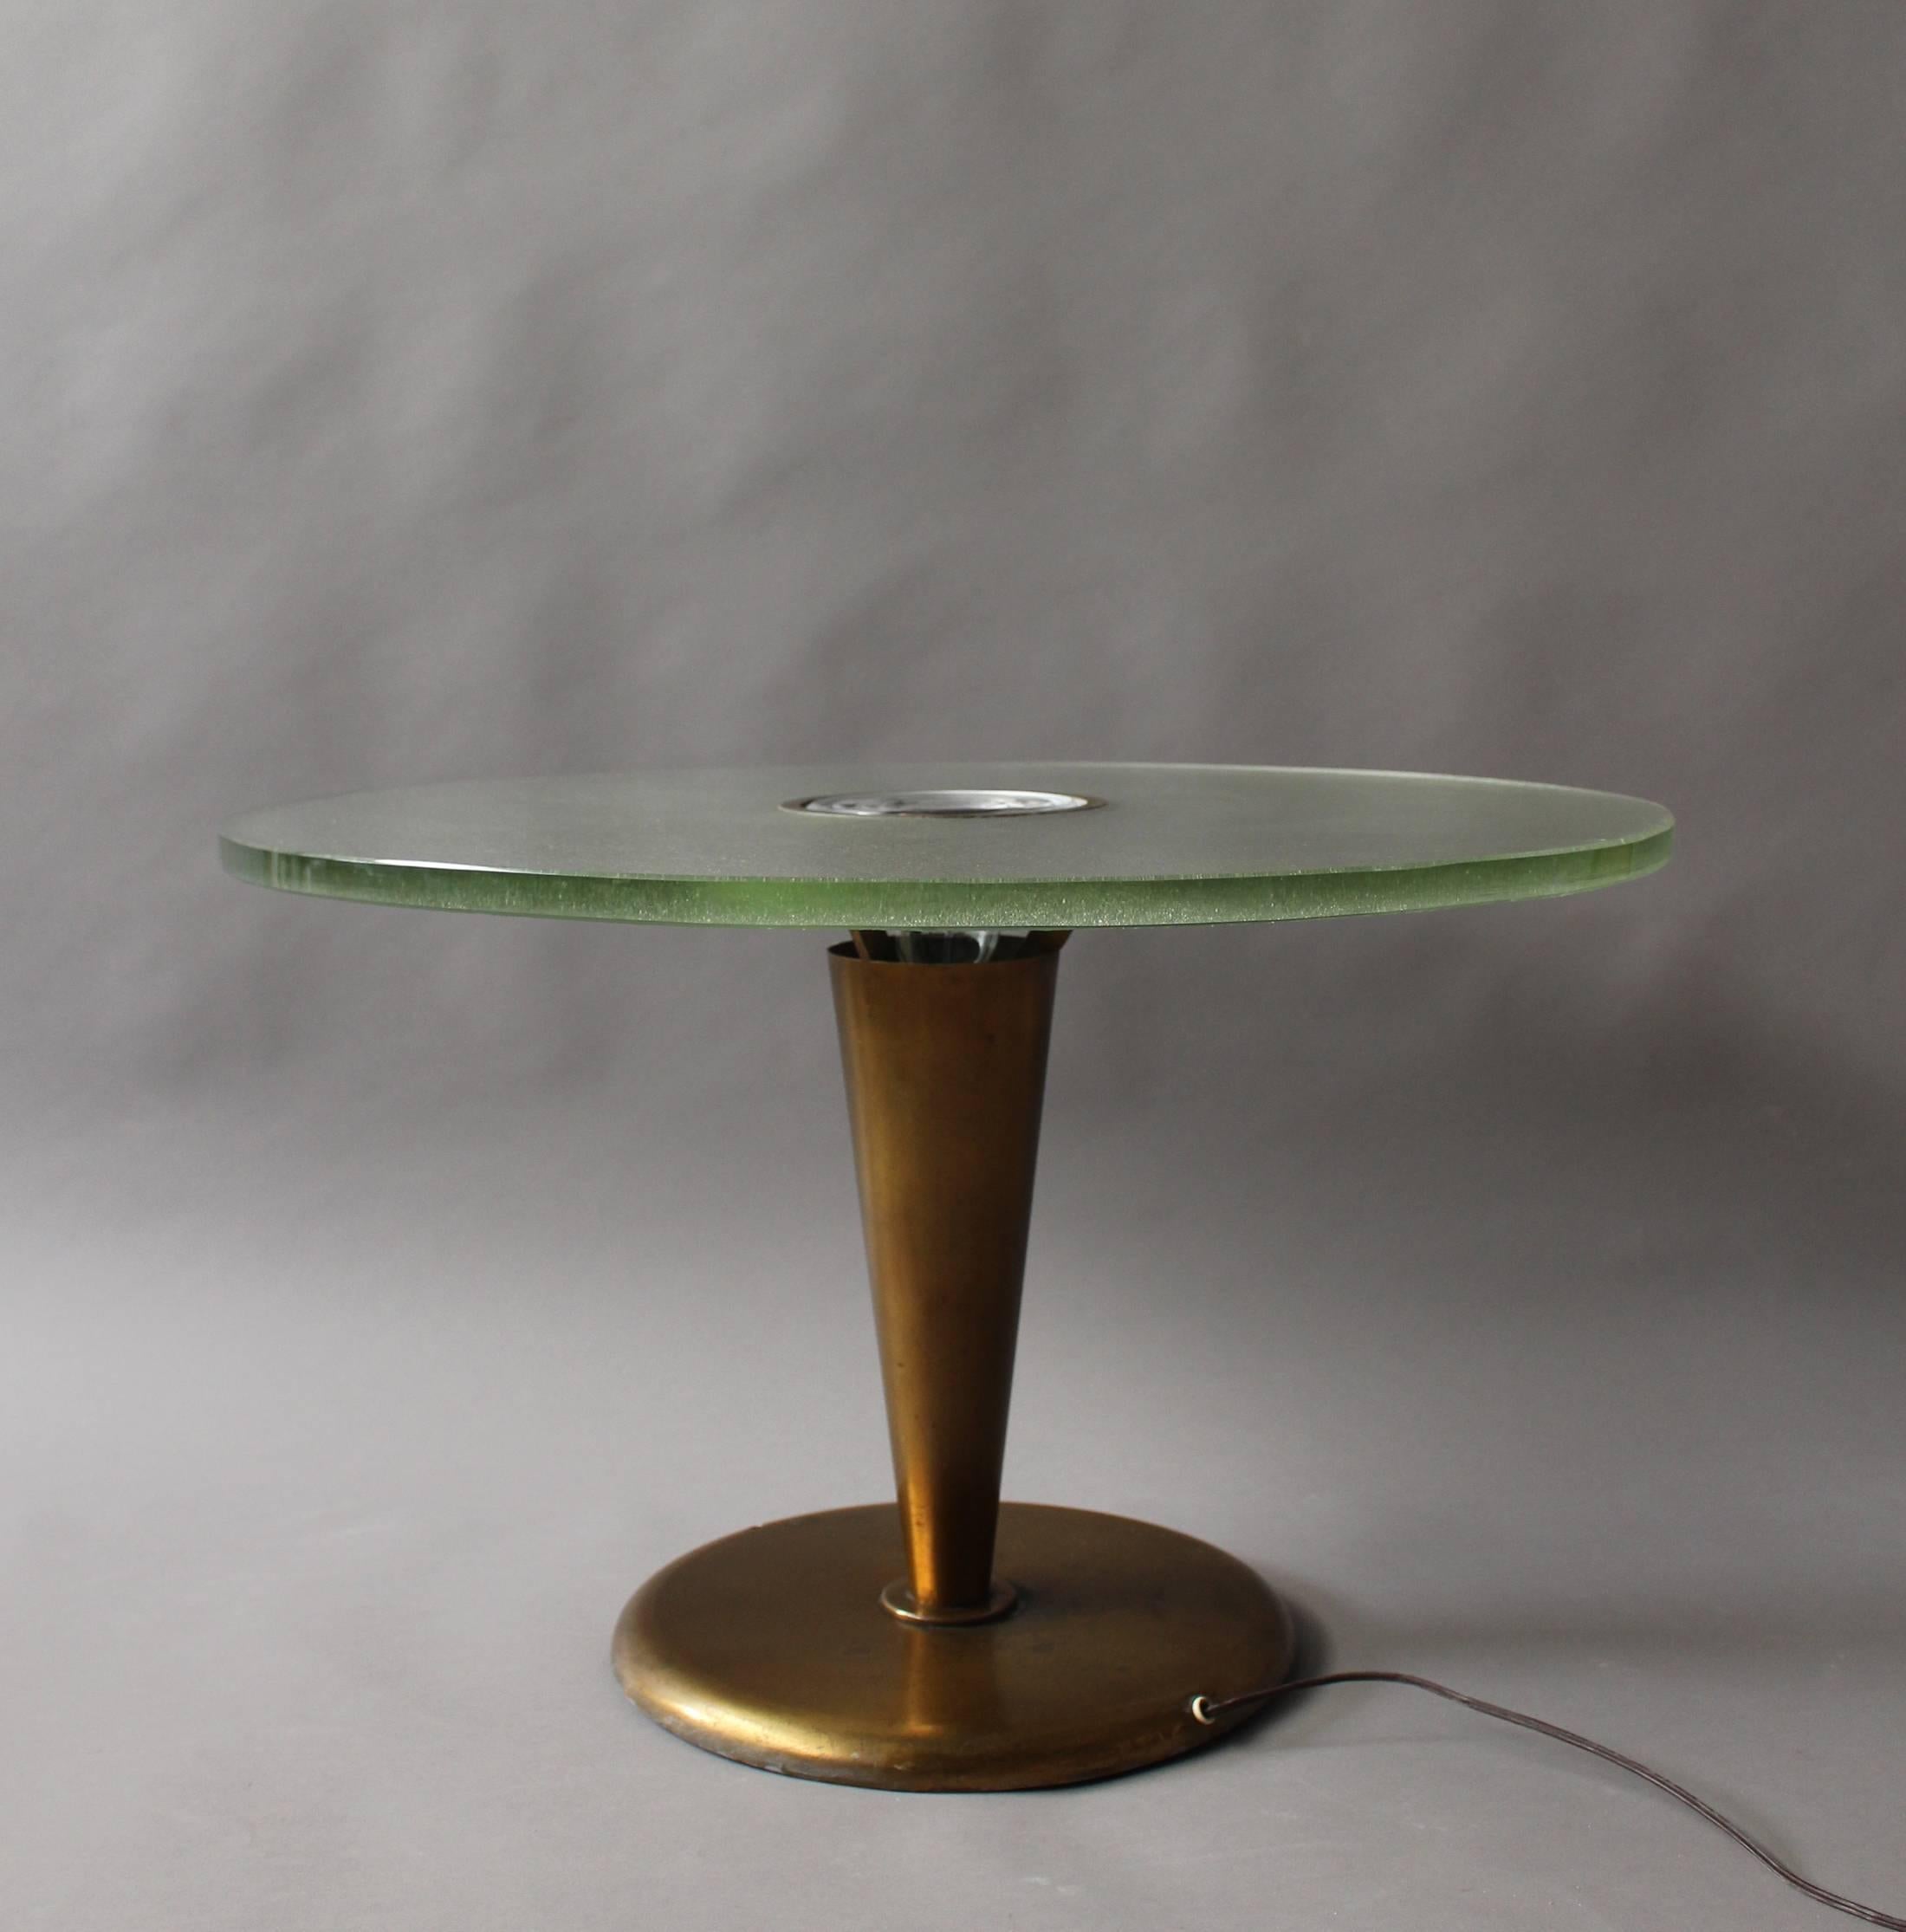 Fine French Art Deco illuminated gueridon/center table made with a conical metal base supporting a Saint Gobain glass slab top with a center prismatic glass lens by Jean Perzel.